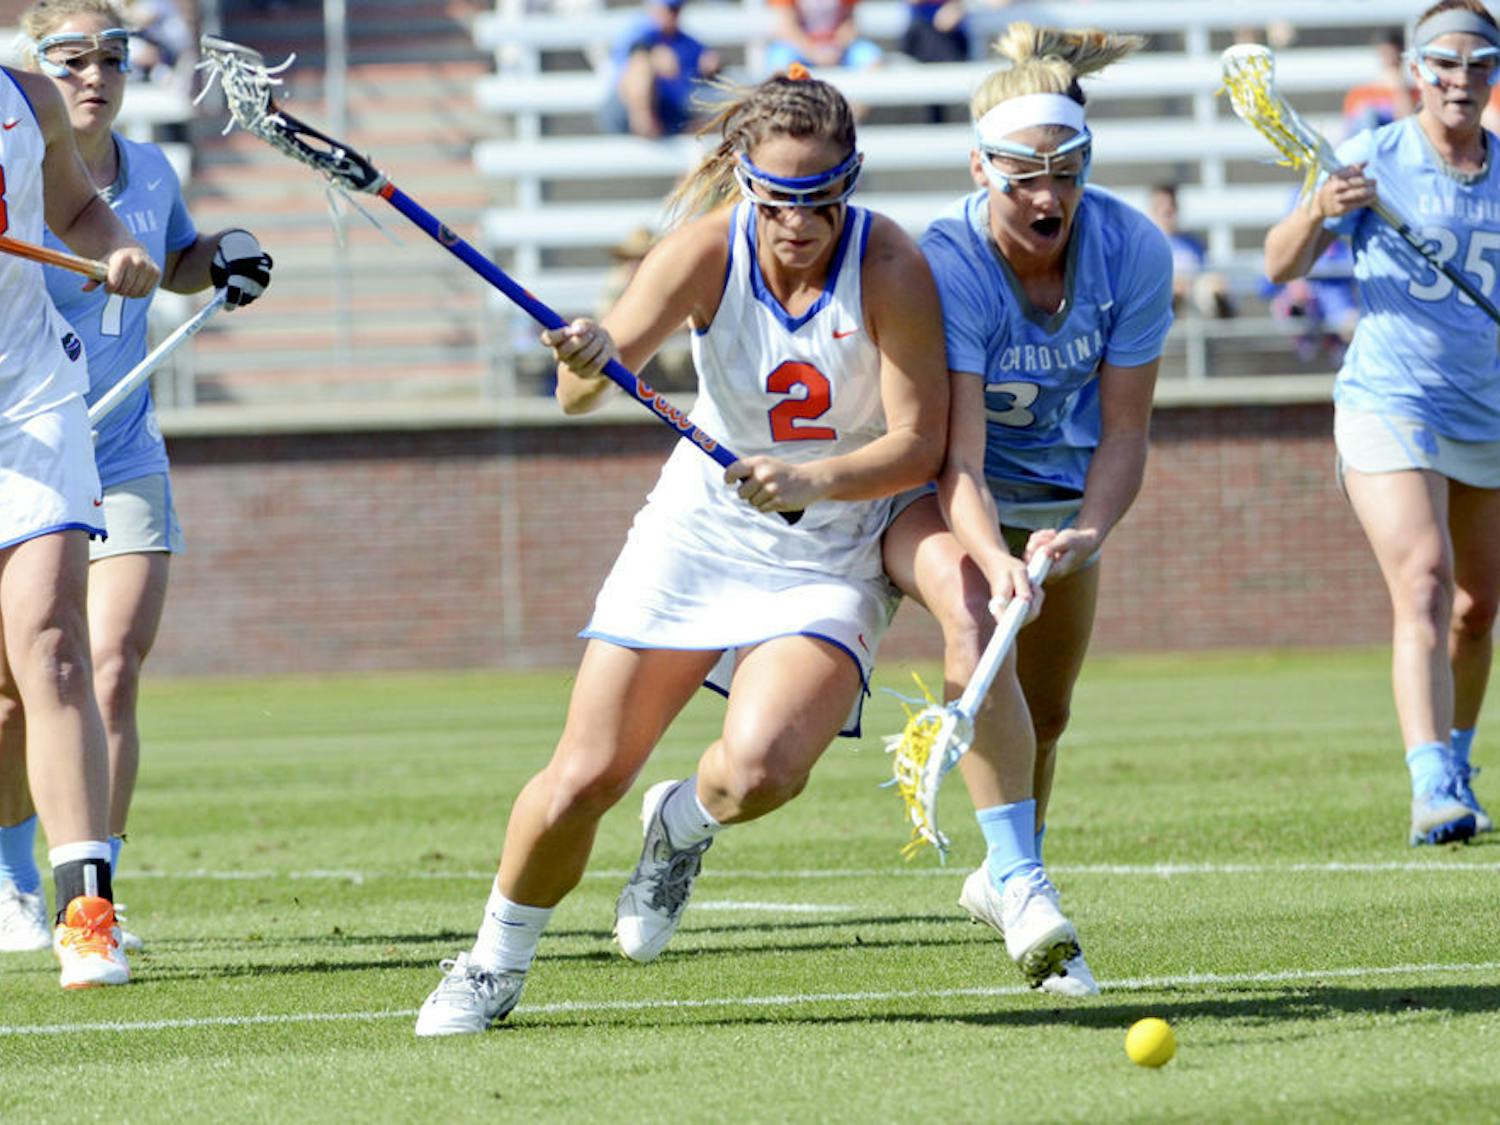 Sophomore attacker Sammi Burgess fights for a ground ball during UF's 17-11 loss to UNC at Donald R. Dizney Stadium.